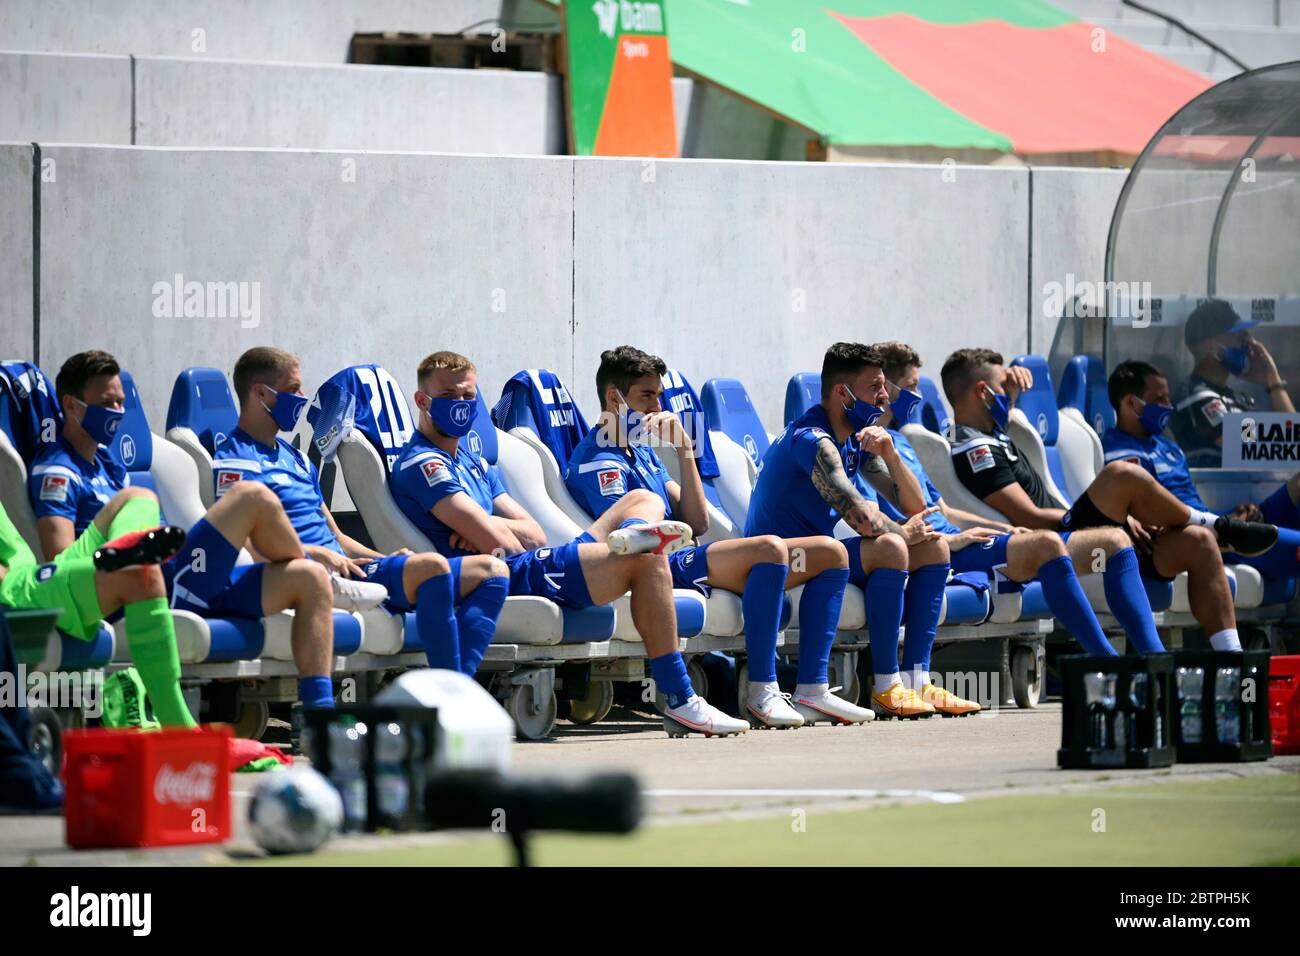 KSC players sit on the bench observing social distancing and wearing face masks to protect against coronavirus, sit on the bench during the 2nd Bundesliga soccer match beteween Karlsruher SC and SV Darmstadt 98, in Karlsruhe, Germany, Saturday, May 16, 2020. Professional soccer has resumed after a two-month break in Germany with four games in the second division. Stock Photo